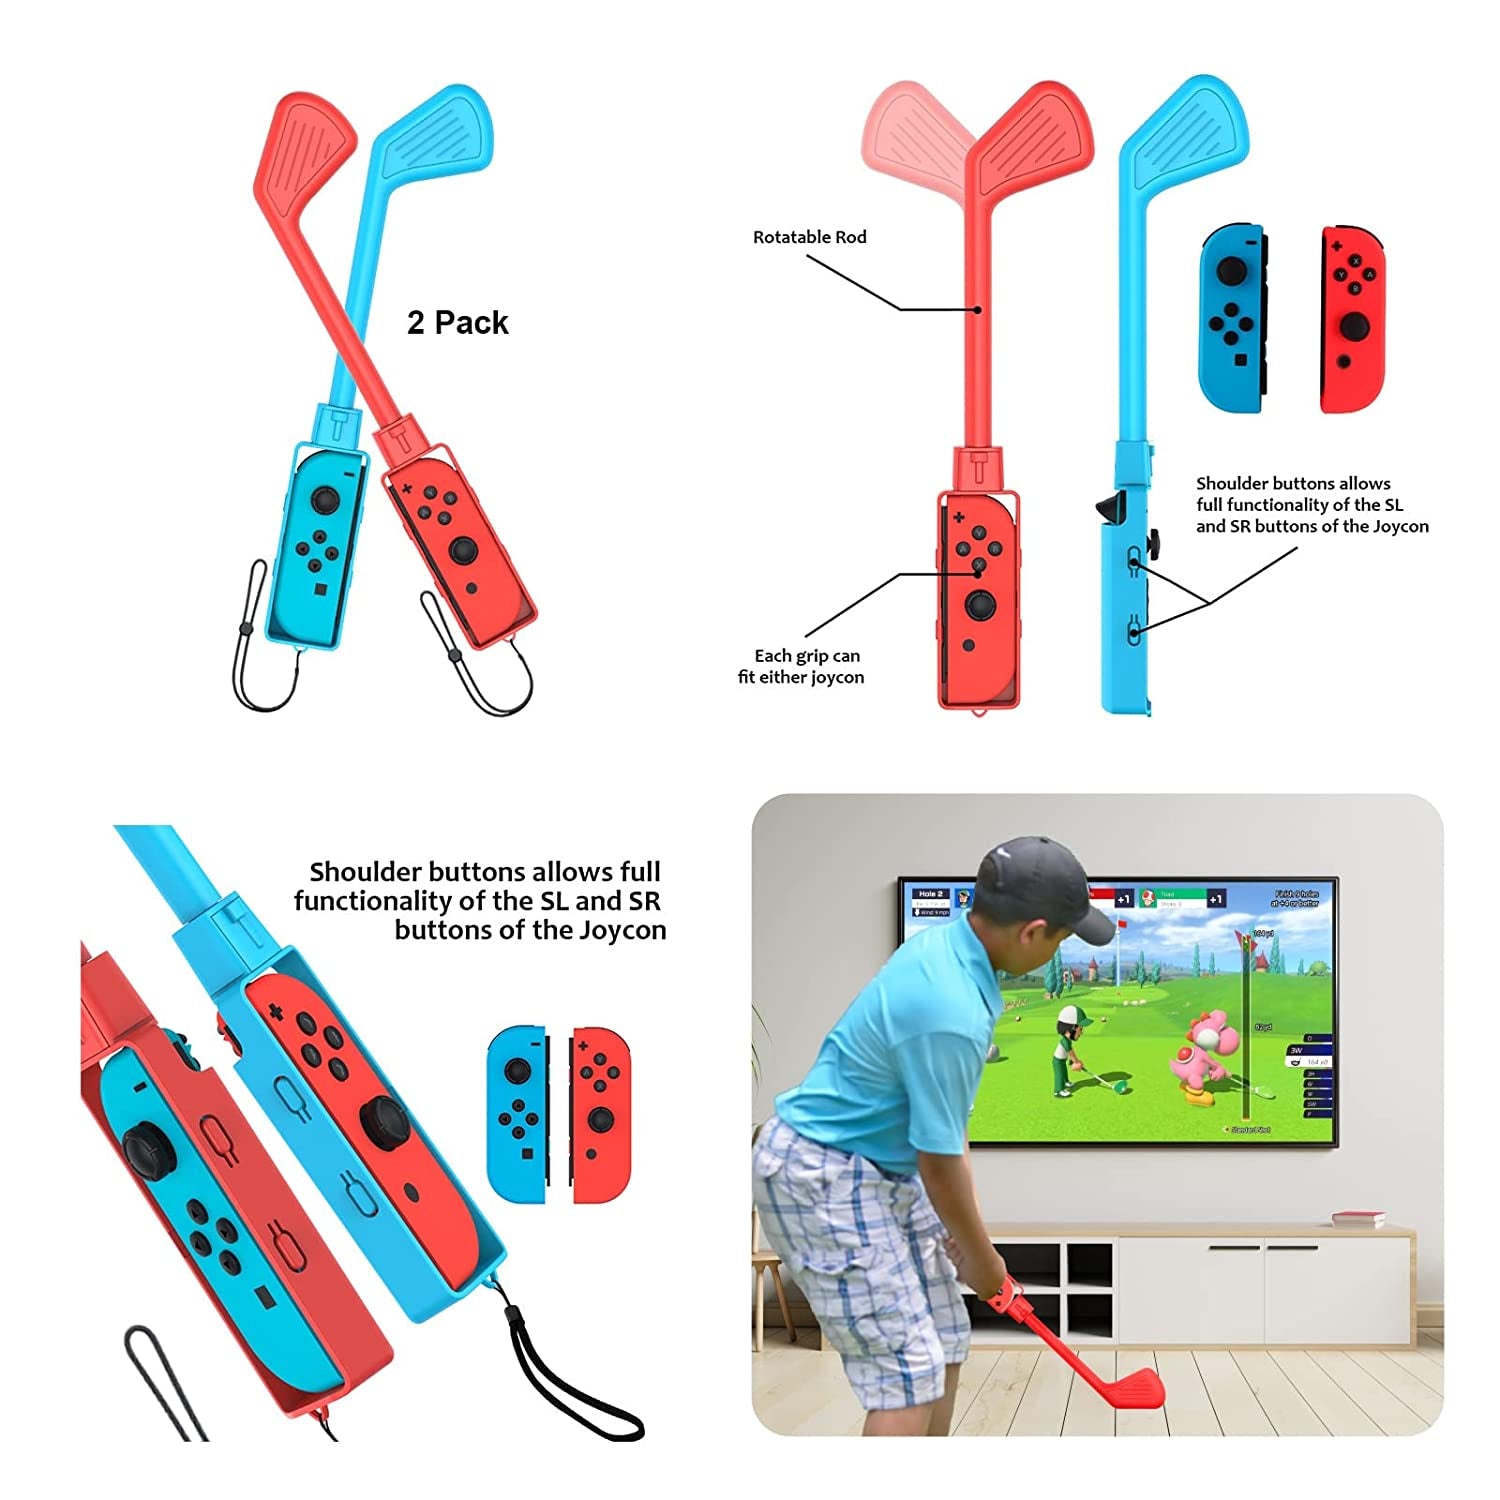 11-in-1 Sports Accessories Bundle for Nintendo Switch - Family-Friendly Kit Compatible with Switch/Switch OLED Sports Games